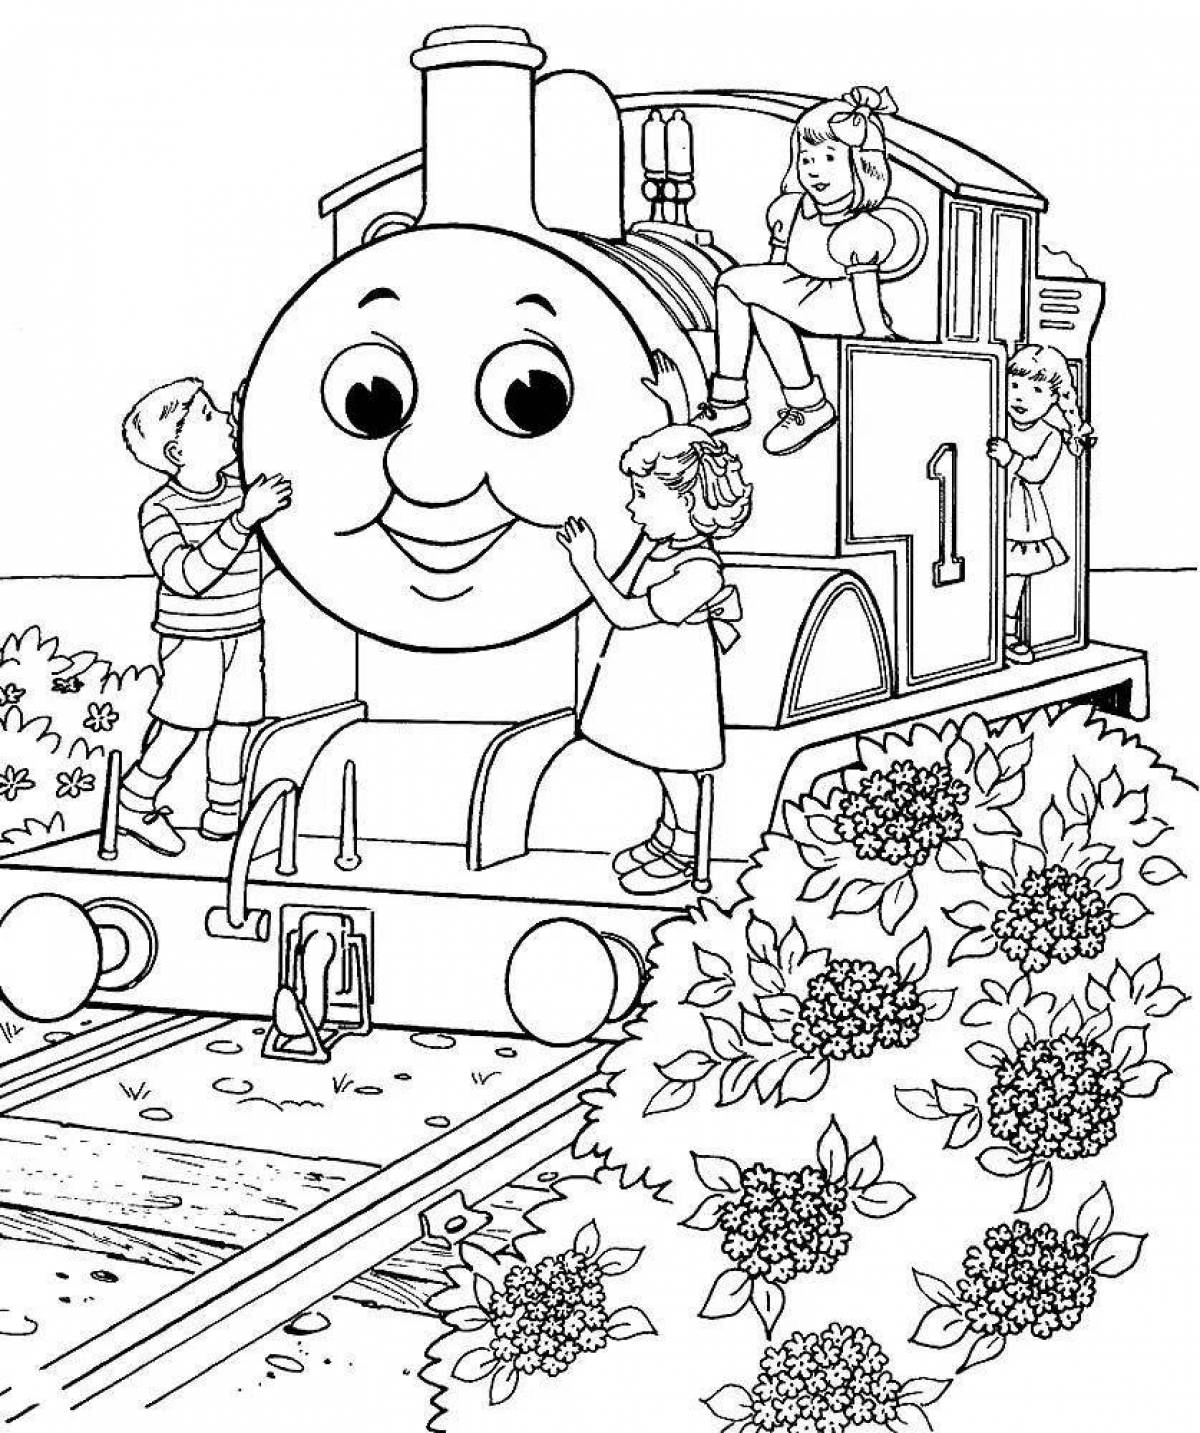 Lovely thomas locomotive coloring page